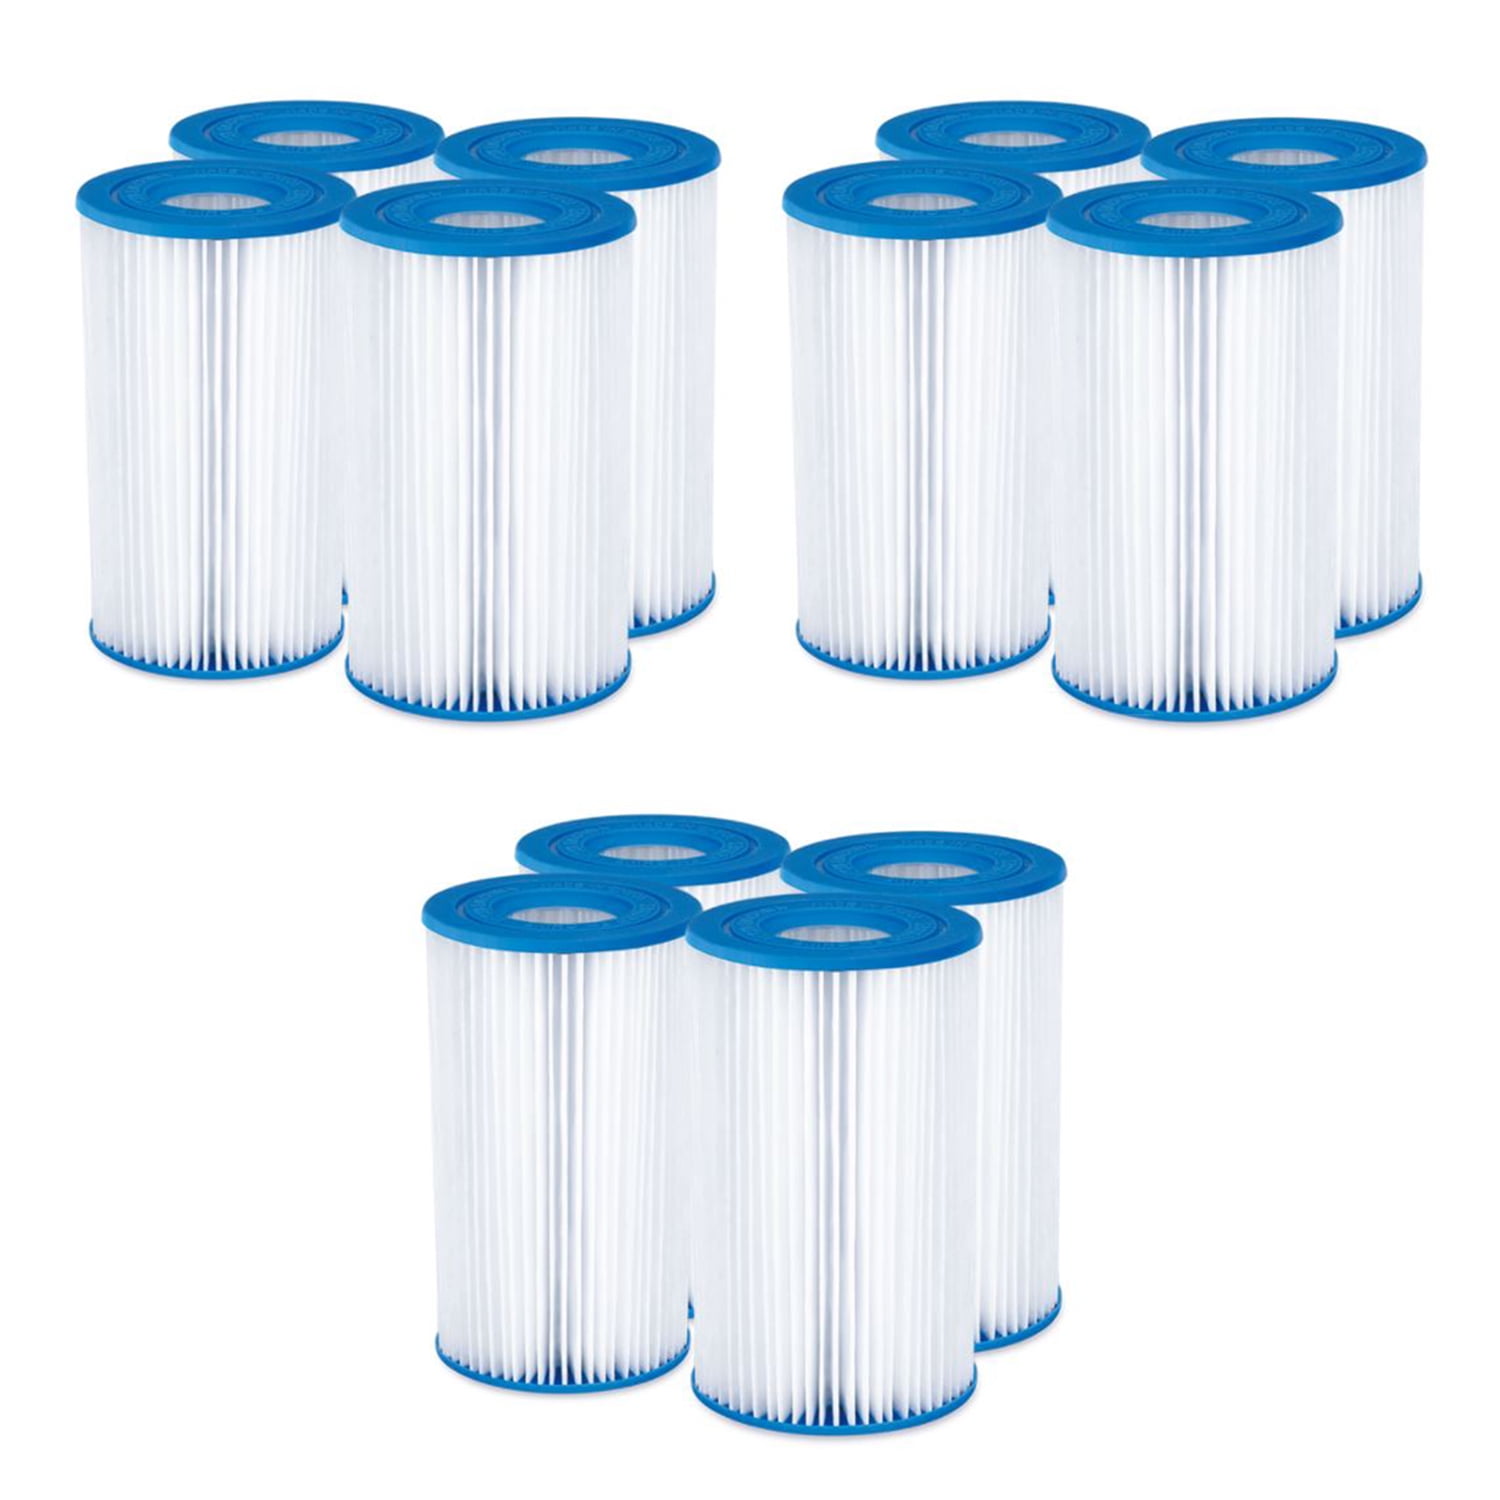 NEW Summer Waves Filter Cartridge 4 Pack Type A/C 